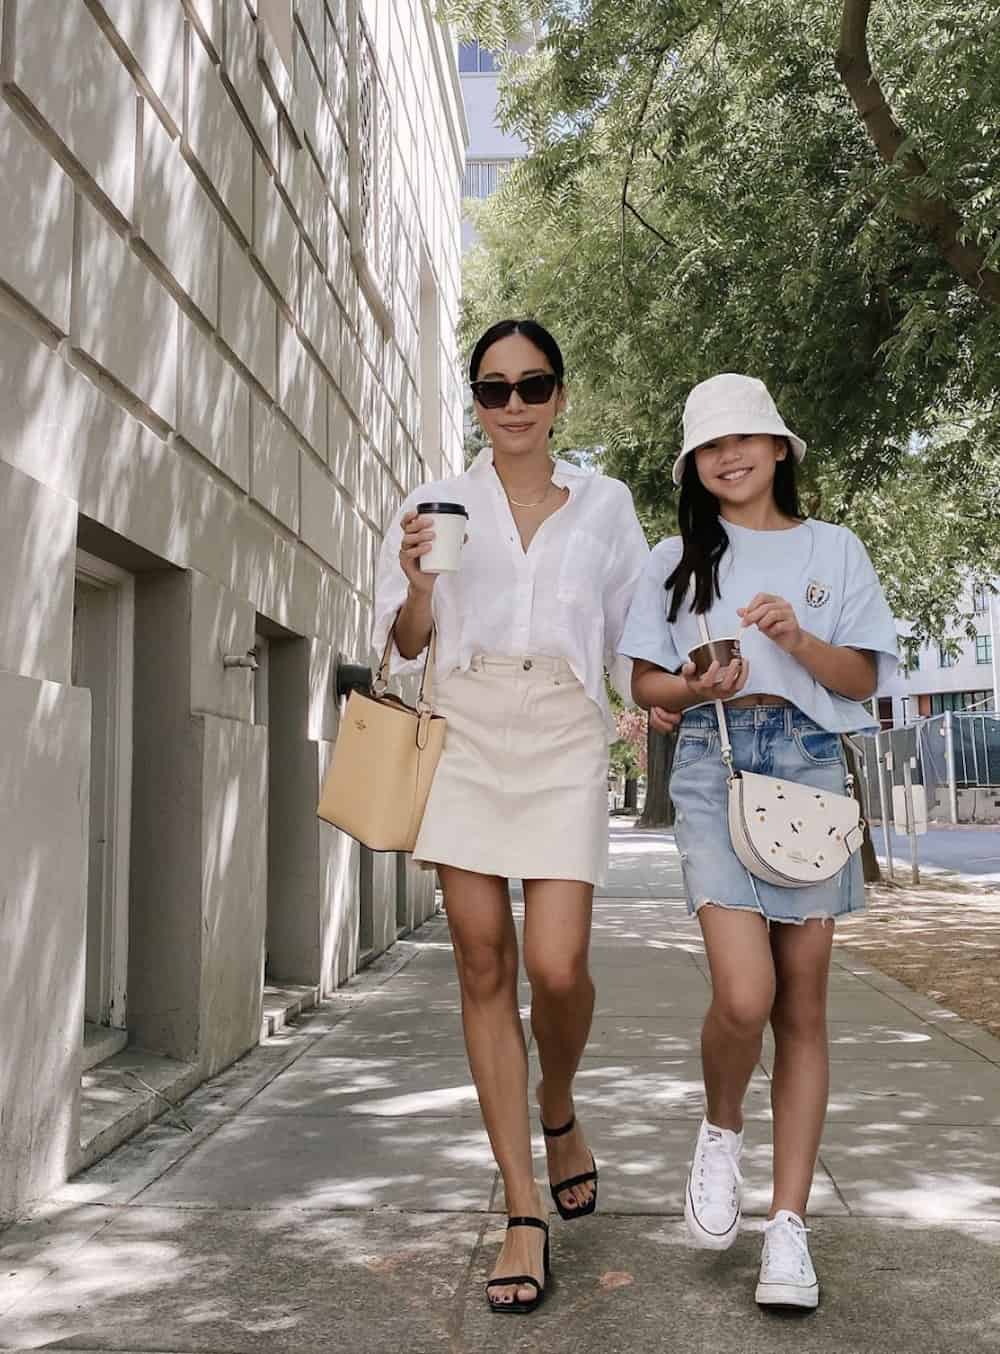 image of an asian woman walking with her daughter, she is wearing a white button up shirt, cream denim skirt, and black sandals